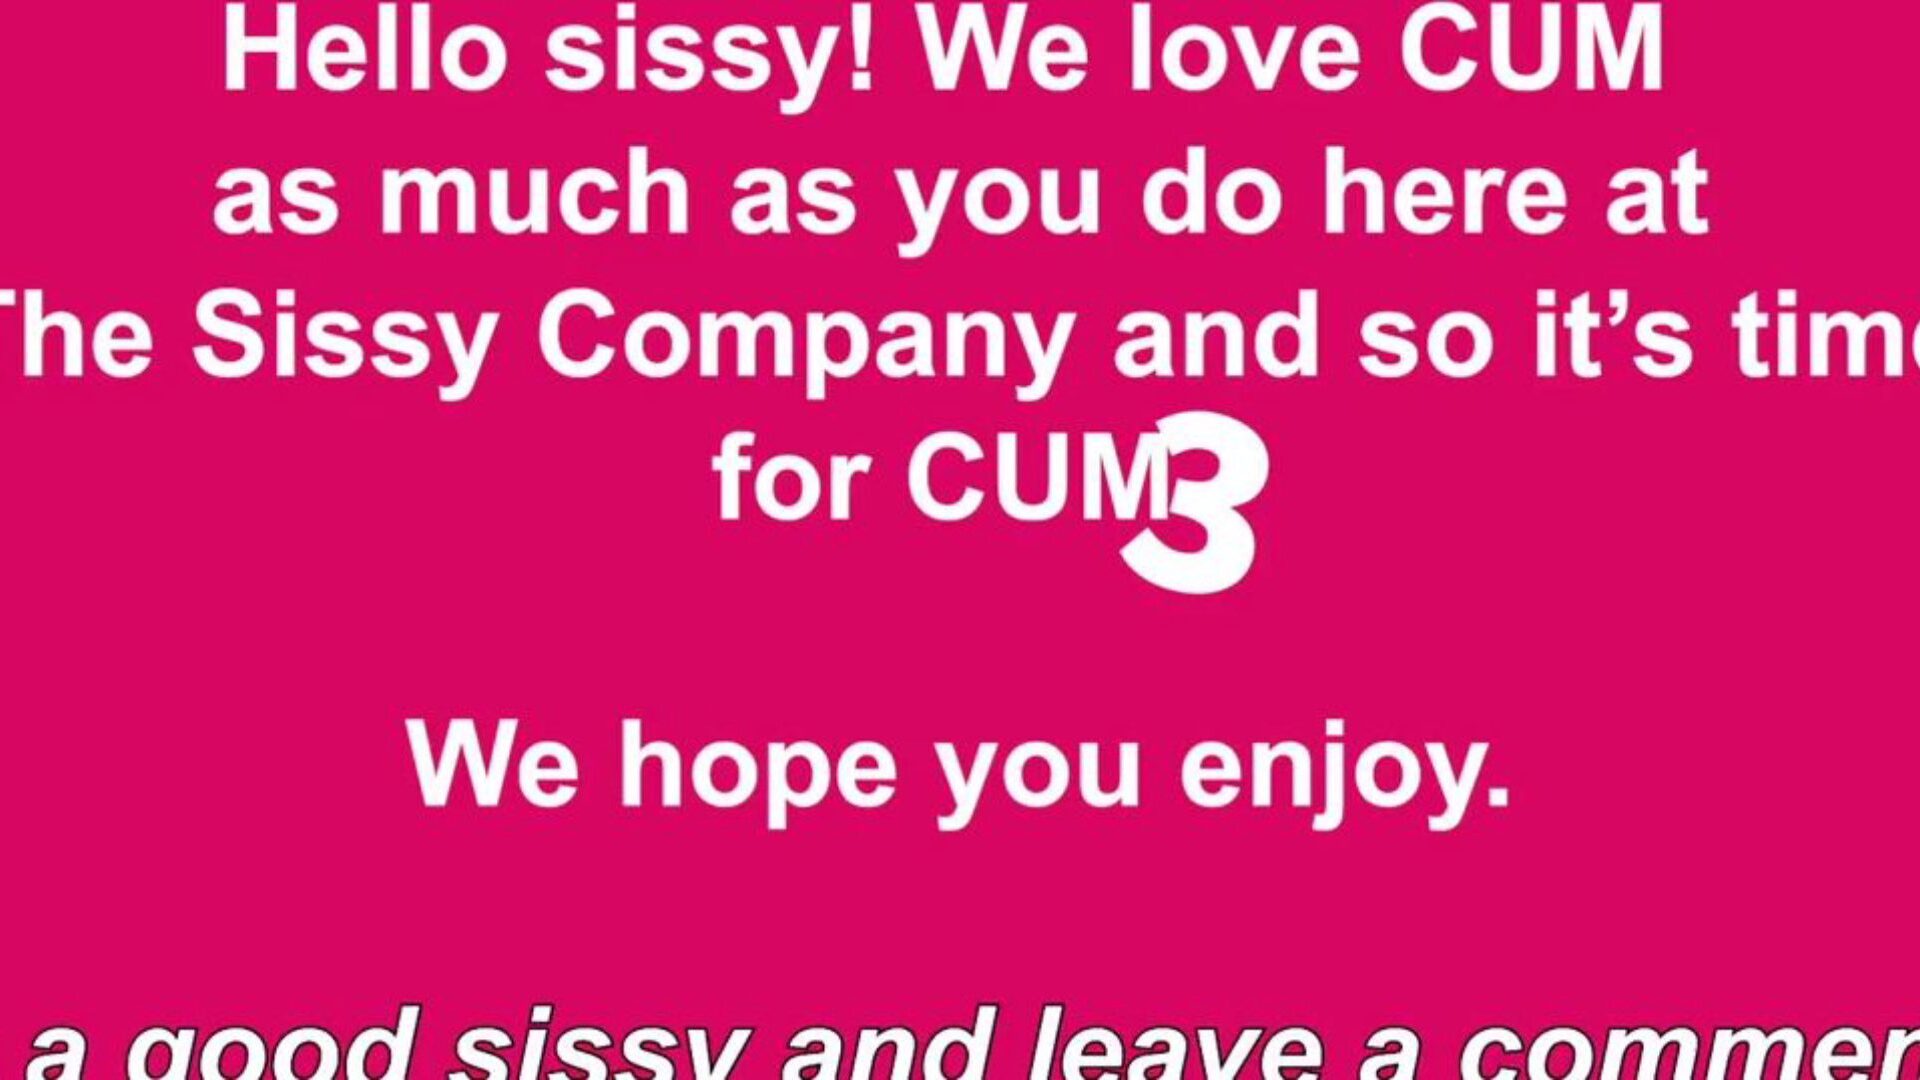 Cum 3 Xxx Cum & Tube three HD Porn Video 74 - xHamster Watch Cum three tube hump video for free-for-all on xHamster, with the fantastic bevy of Xxx Cum, Tube three Xxx 3 & Cum Tube HD porn clip sequences